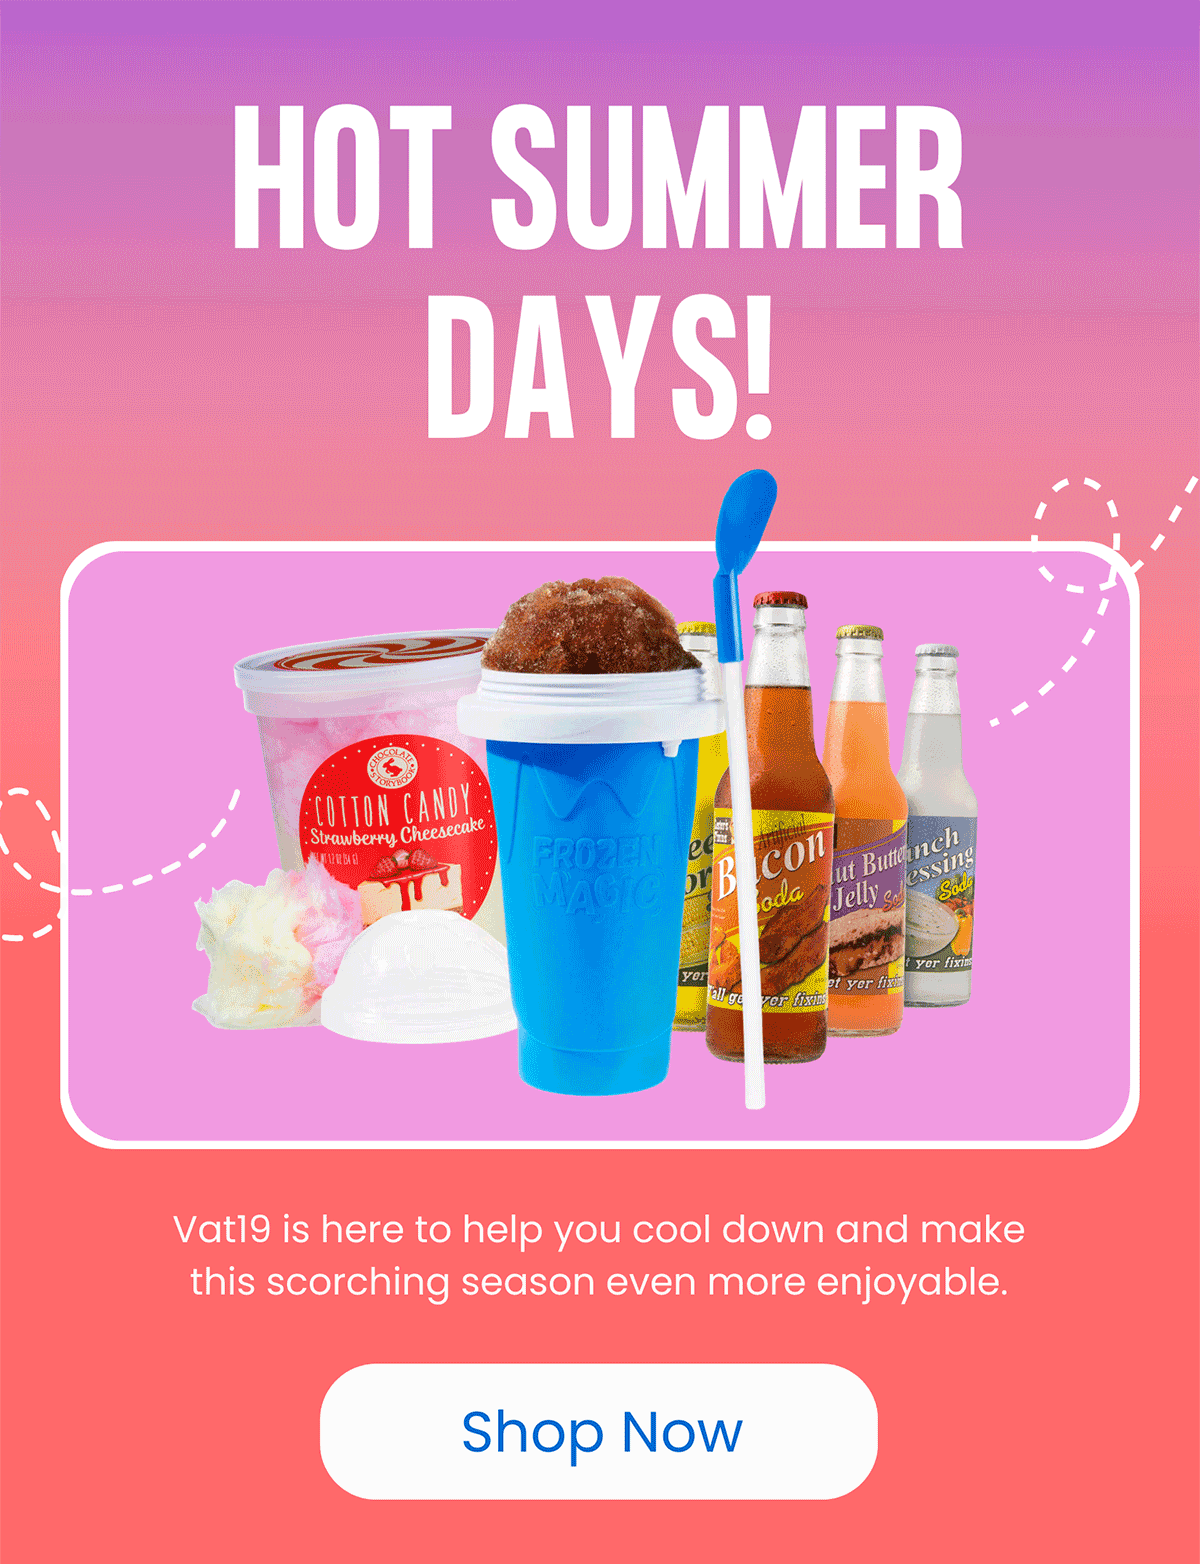 Hot Summer Days! Cool down & make this scorching season even more enjoyable.